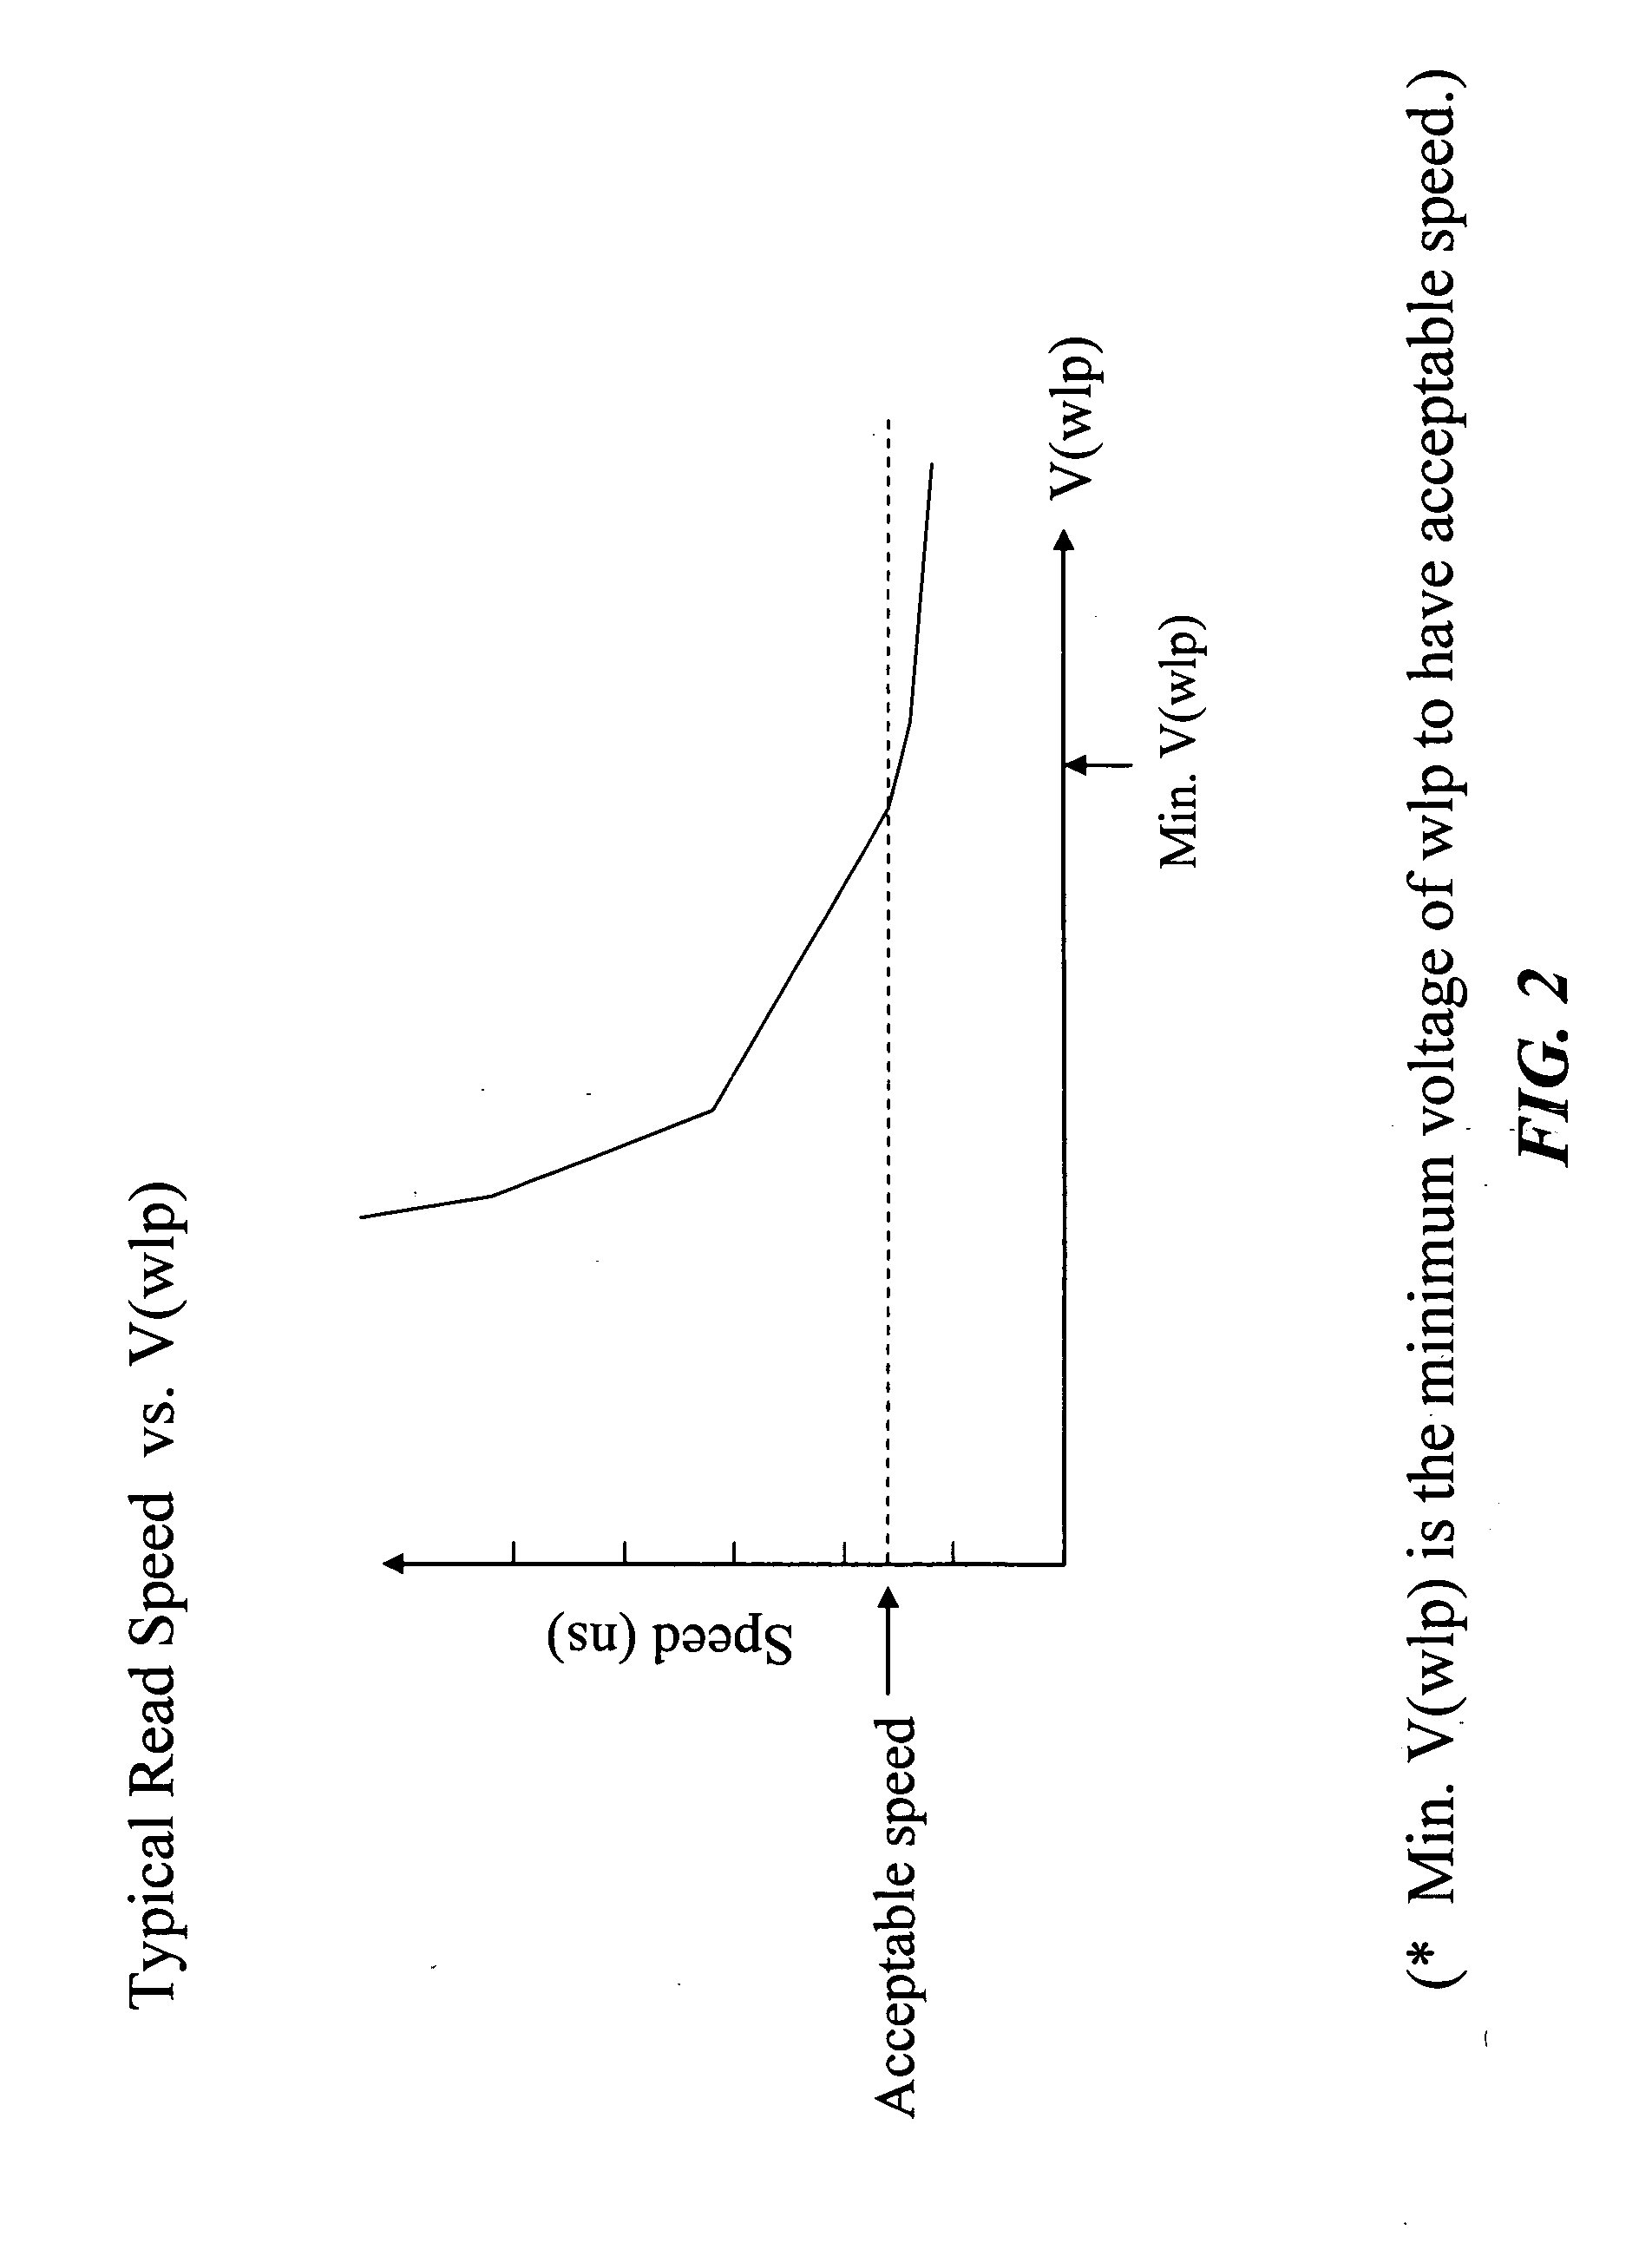 Memory transistor gate oxide stress release and improved reliability